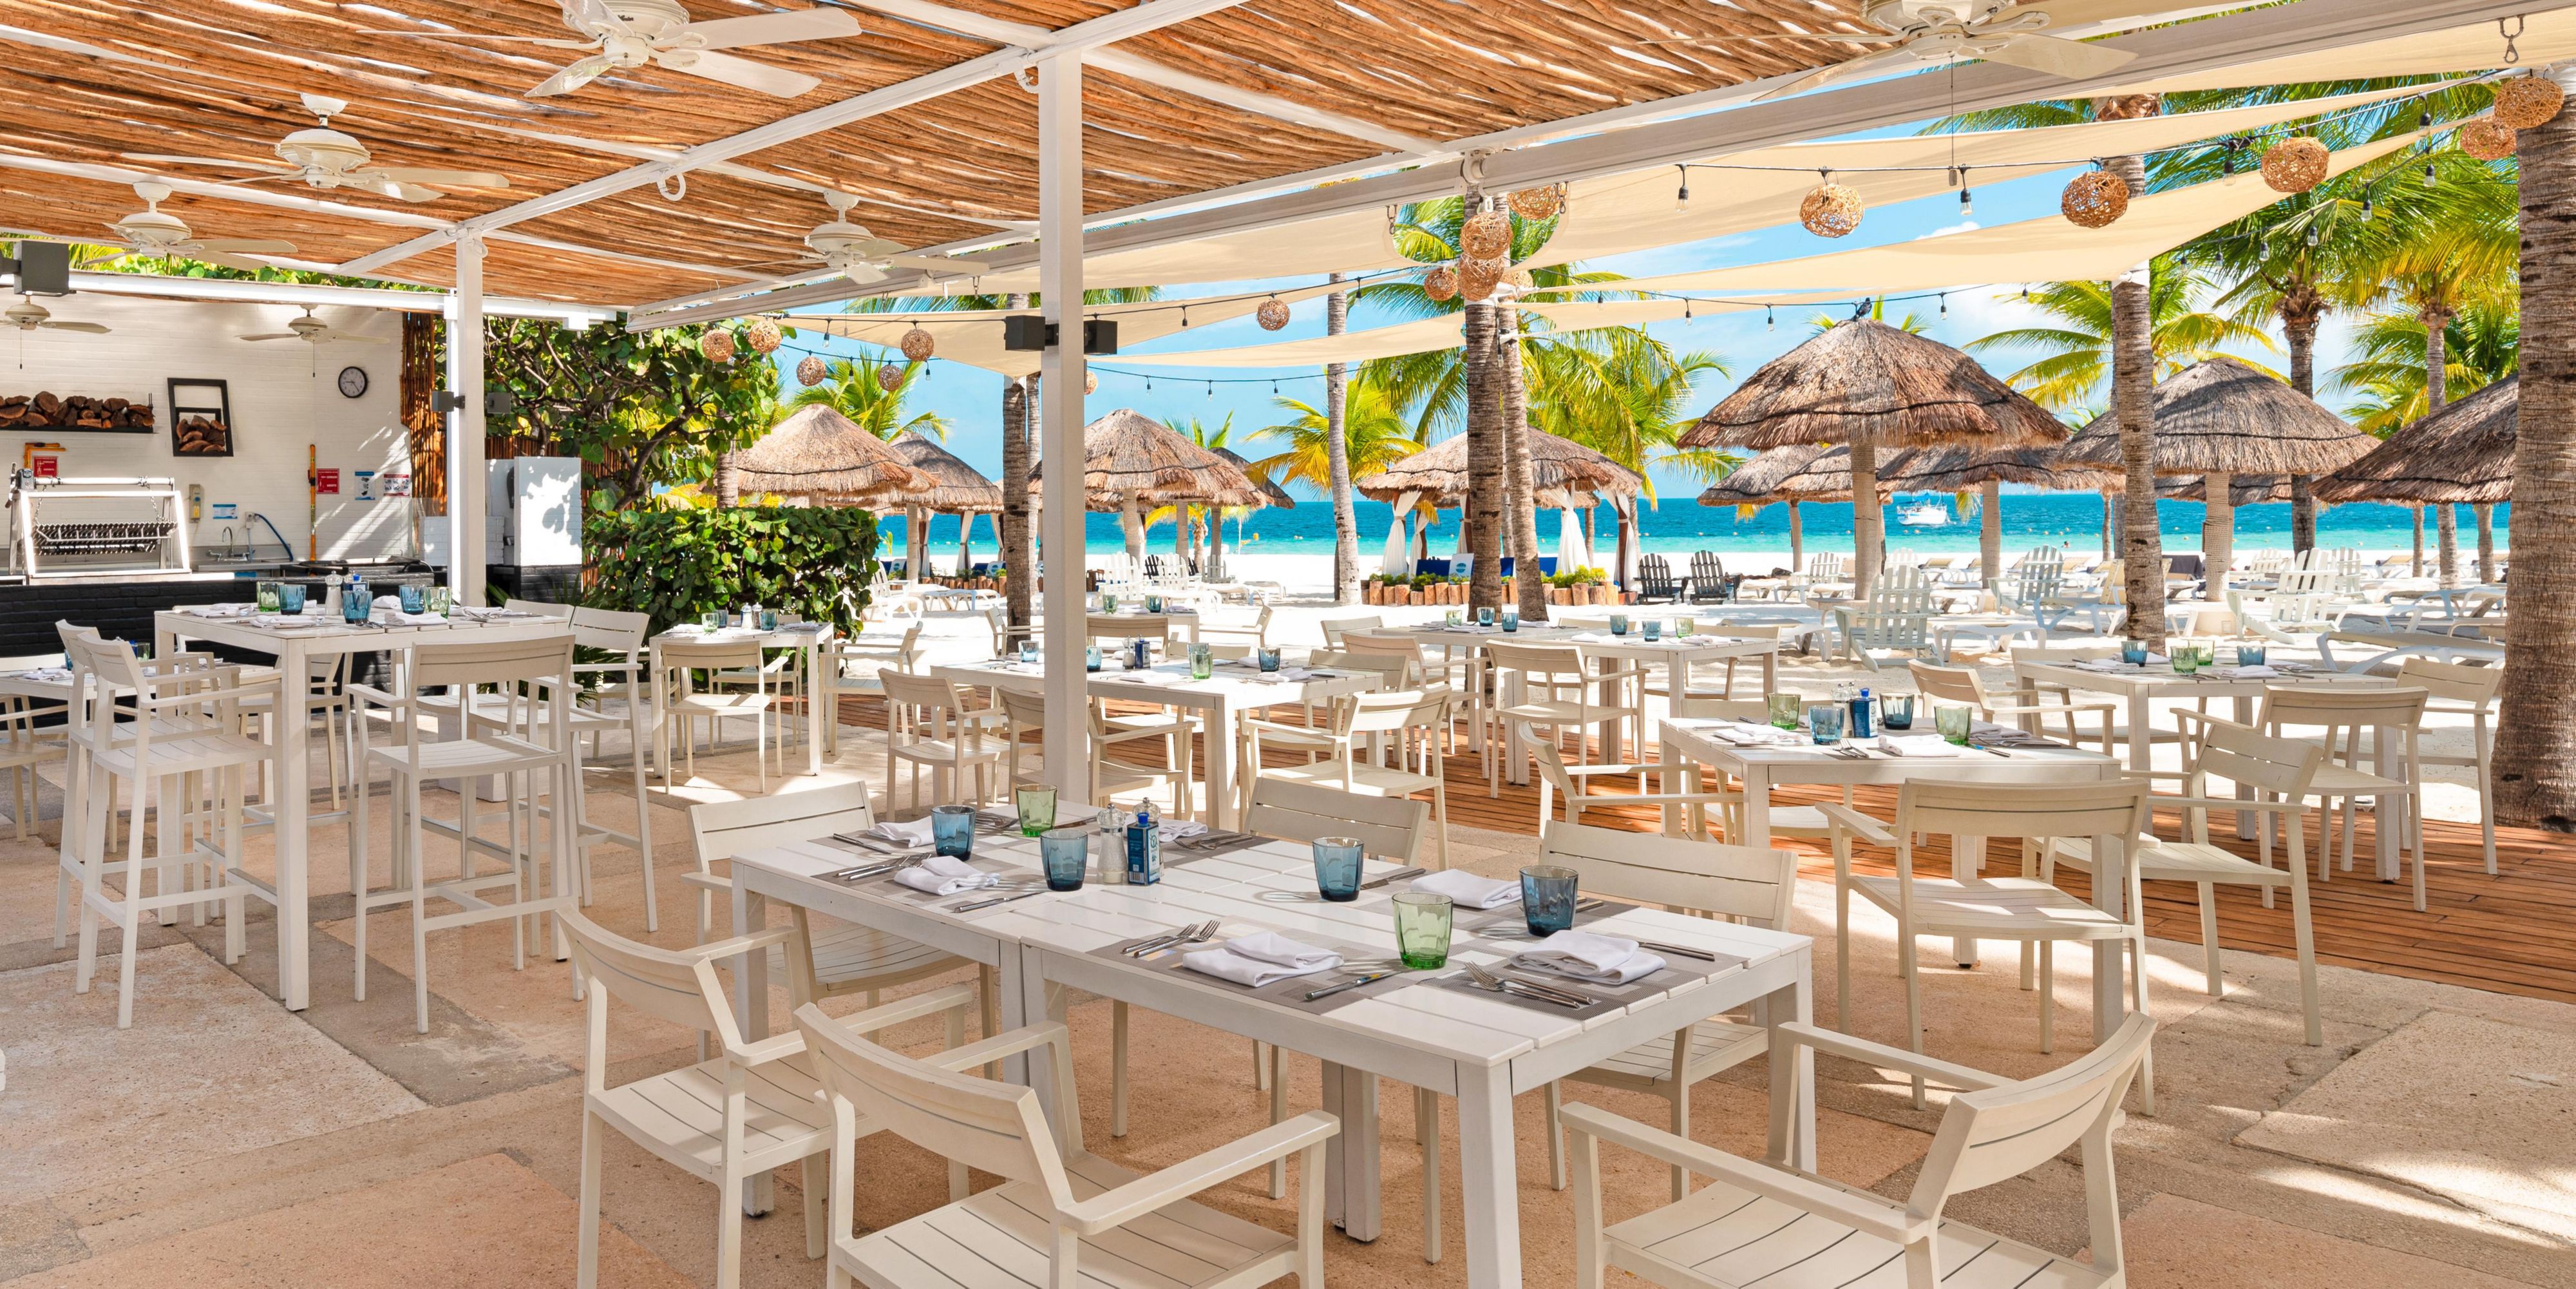 Visit any of our three restaurant venues and go on our culinary journey of fine cuisine. Experience Le Cap which offers Mediterranean dishes including the best fried octopus ceviche. Come to Cancun and enjoy a great dinner on the beach!